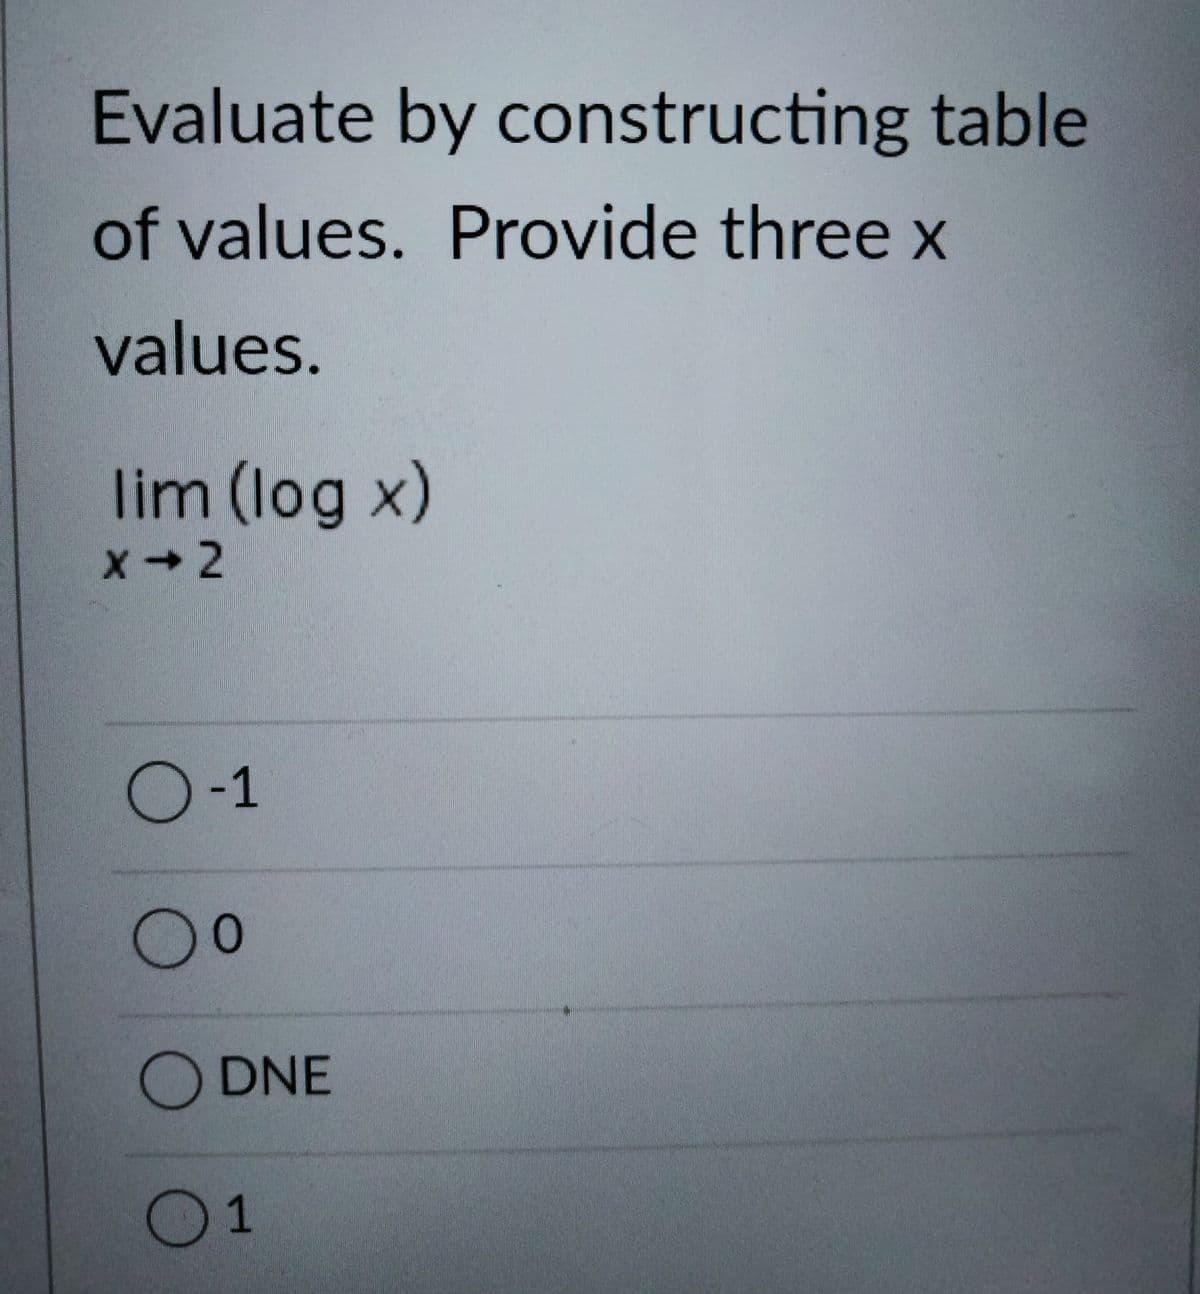 Evaluate by constructing table
of values.
Provide three x
values.
lim (log x)
x-2
O-1
00
DNE
1
